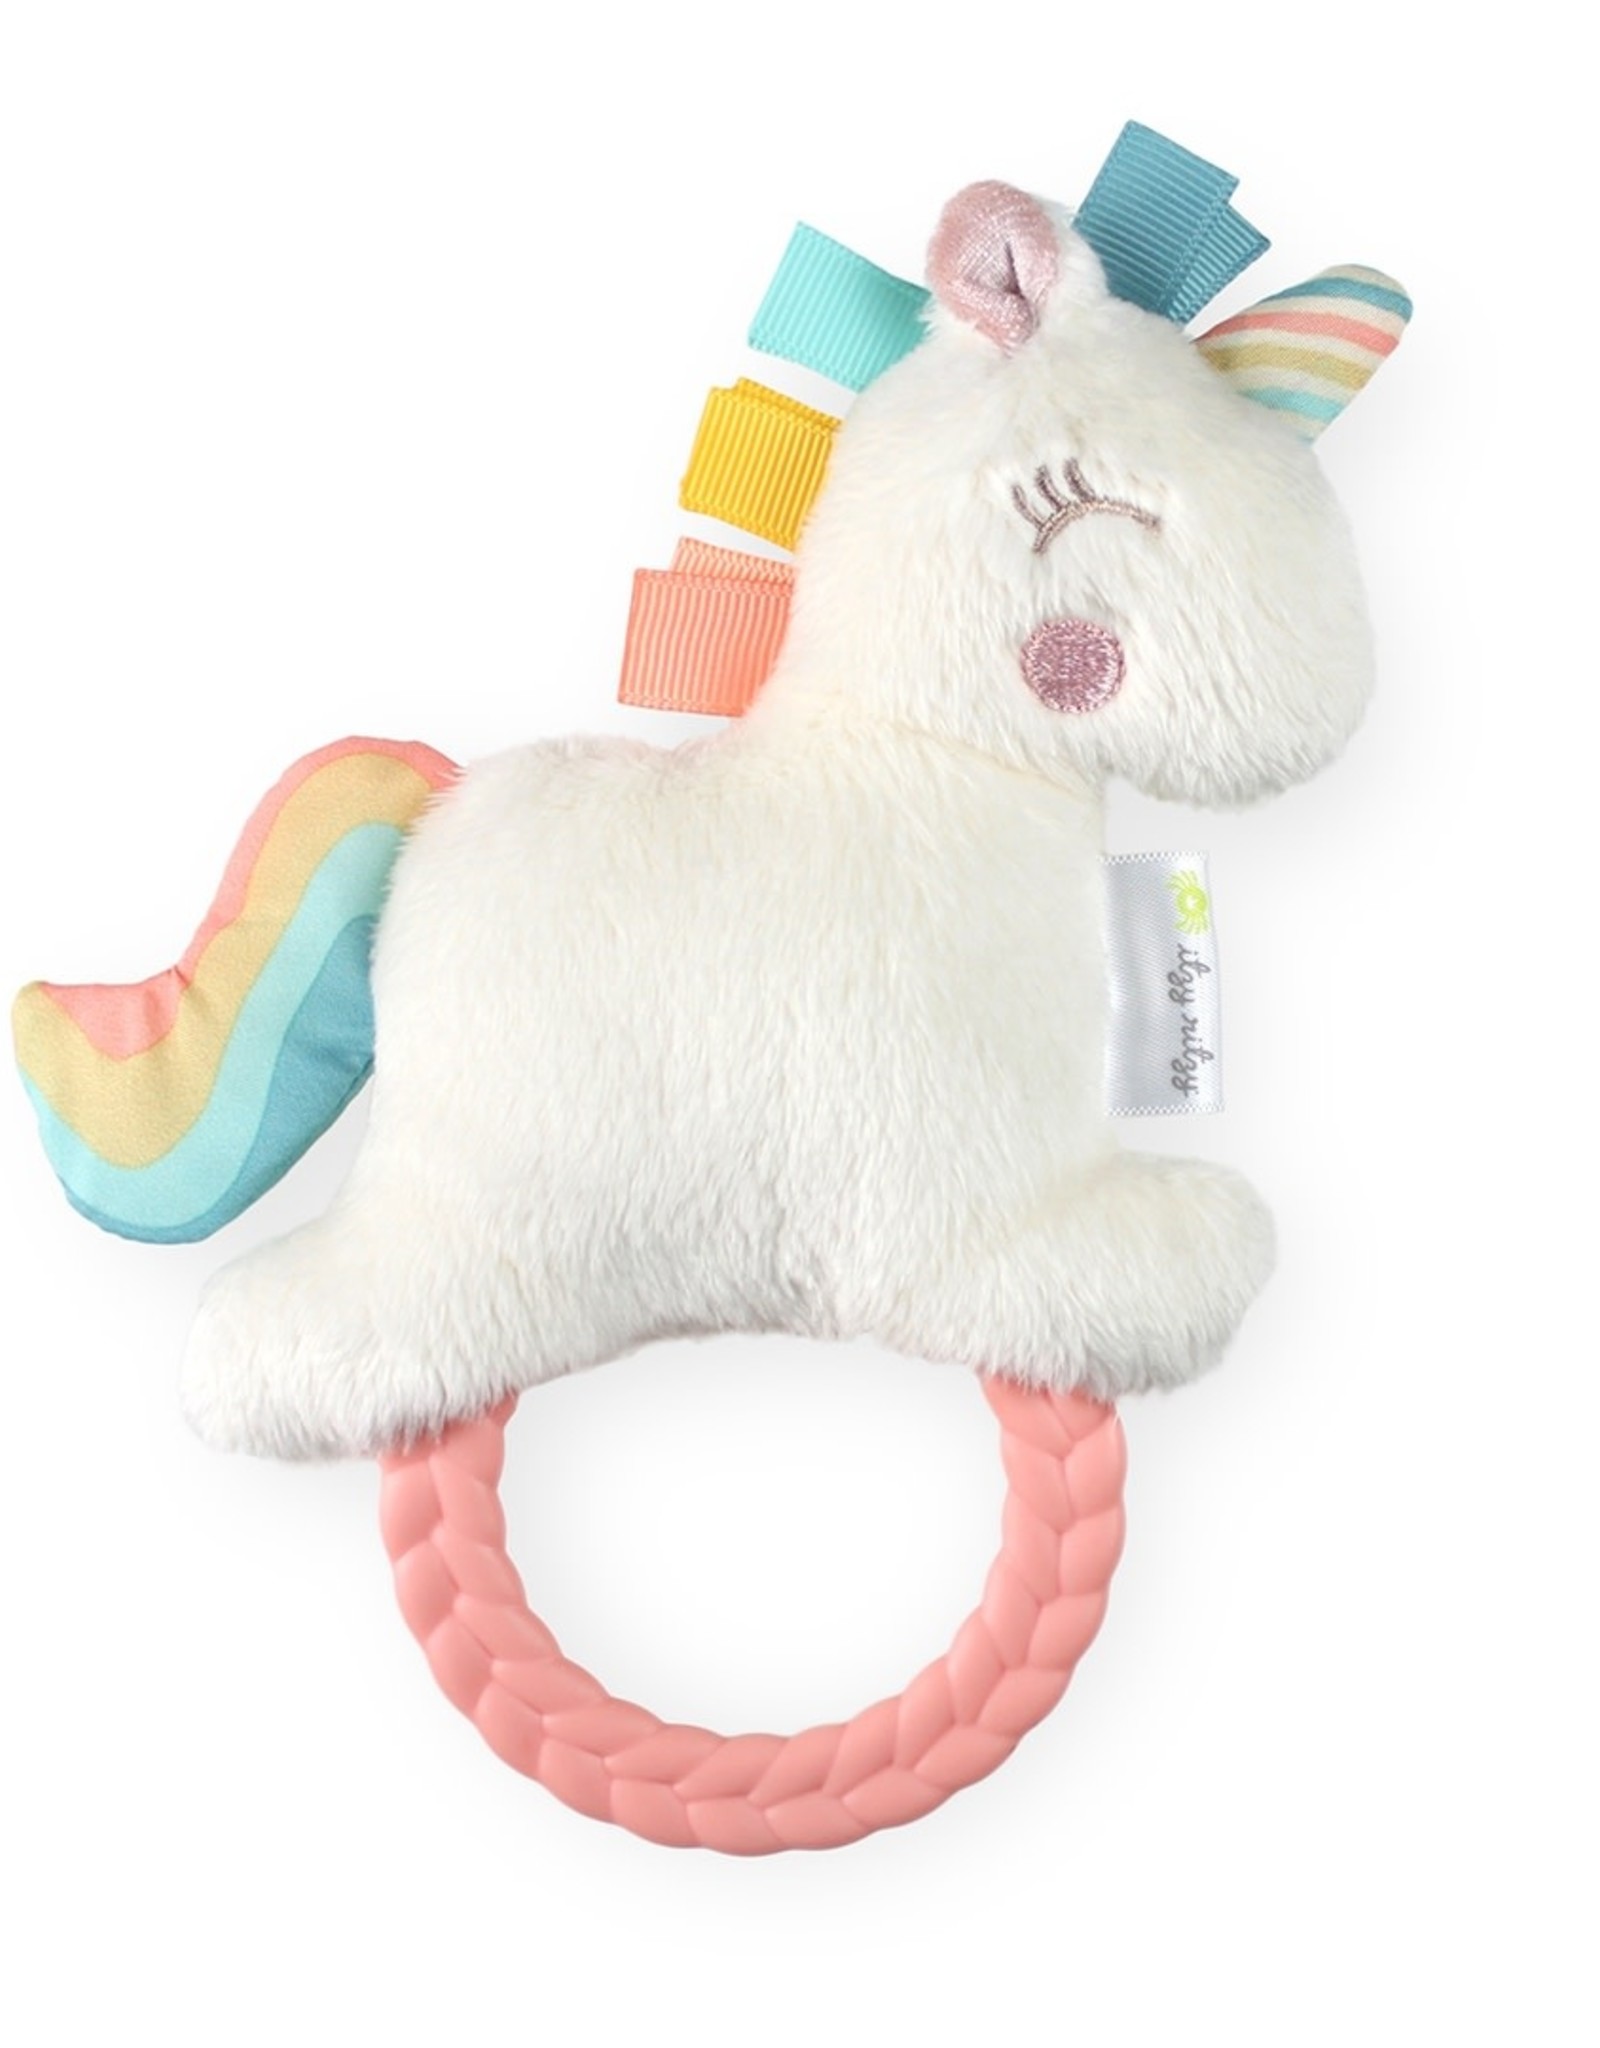 Itzy Ritzy Ritzy Rattle Pal™ Plush Rattle Pal with Teether - Unicorn